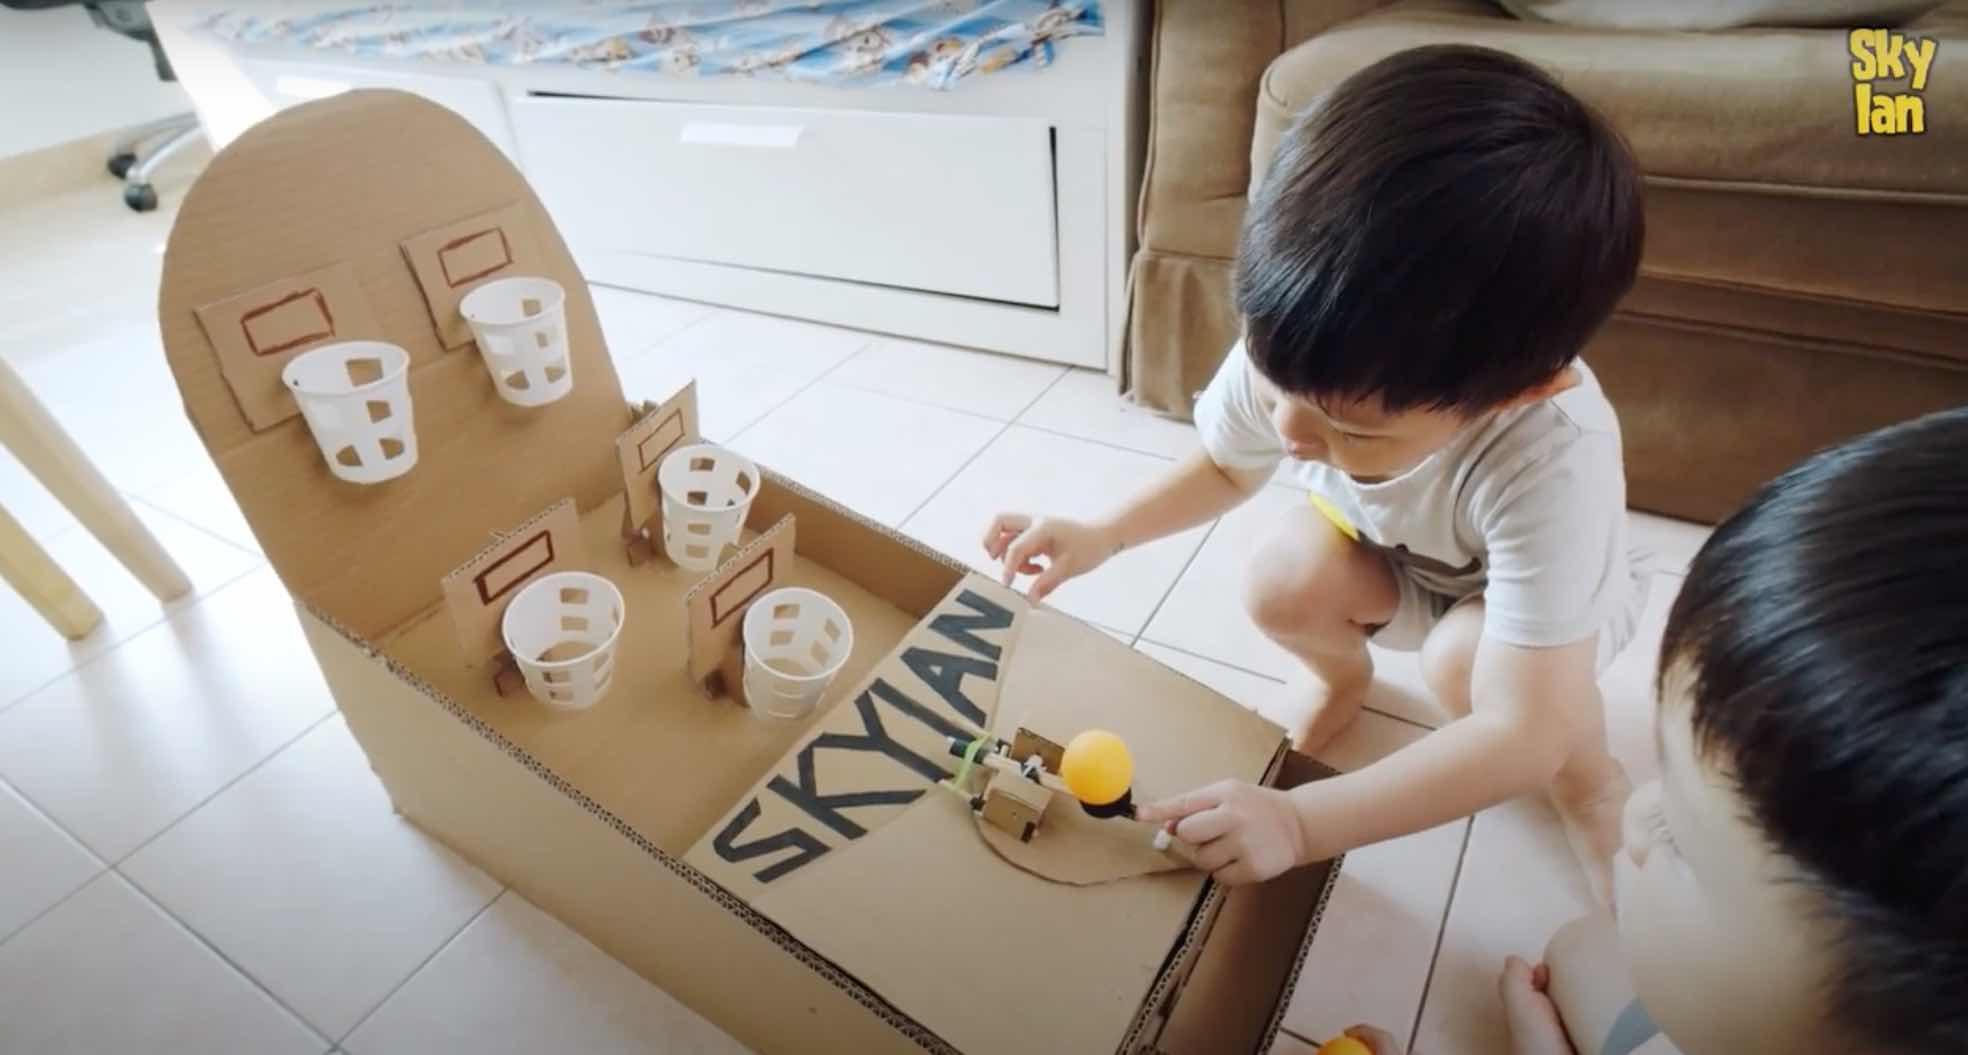 playing and learning with cardboard